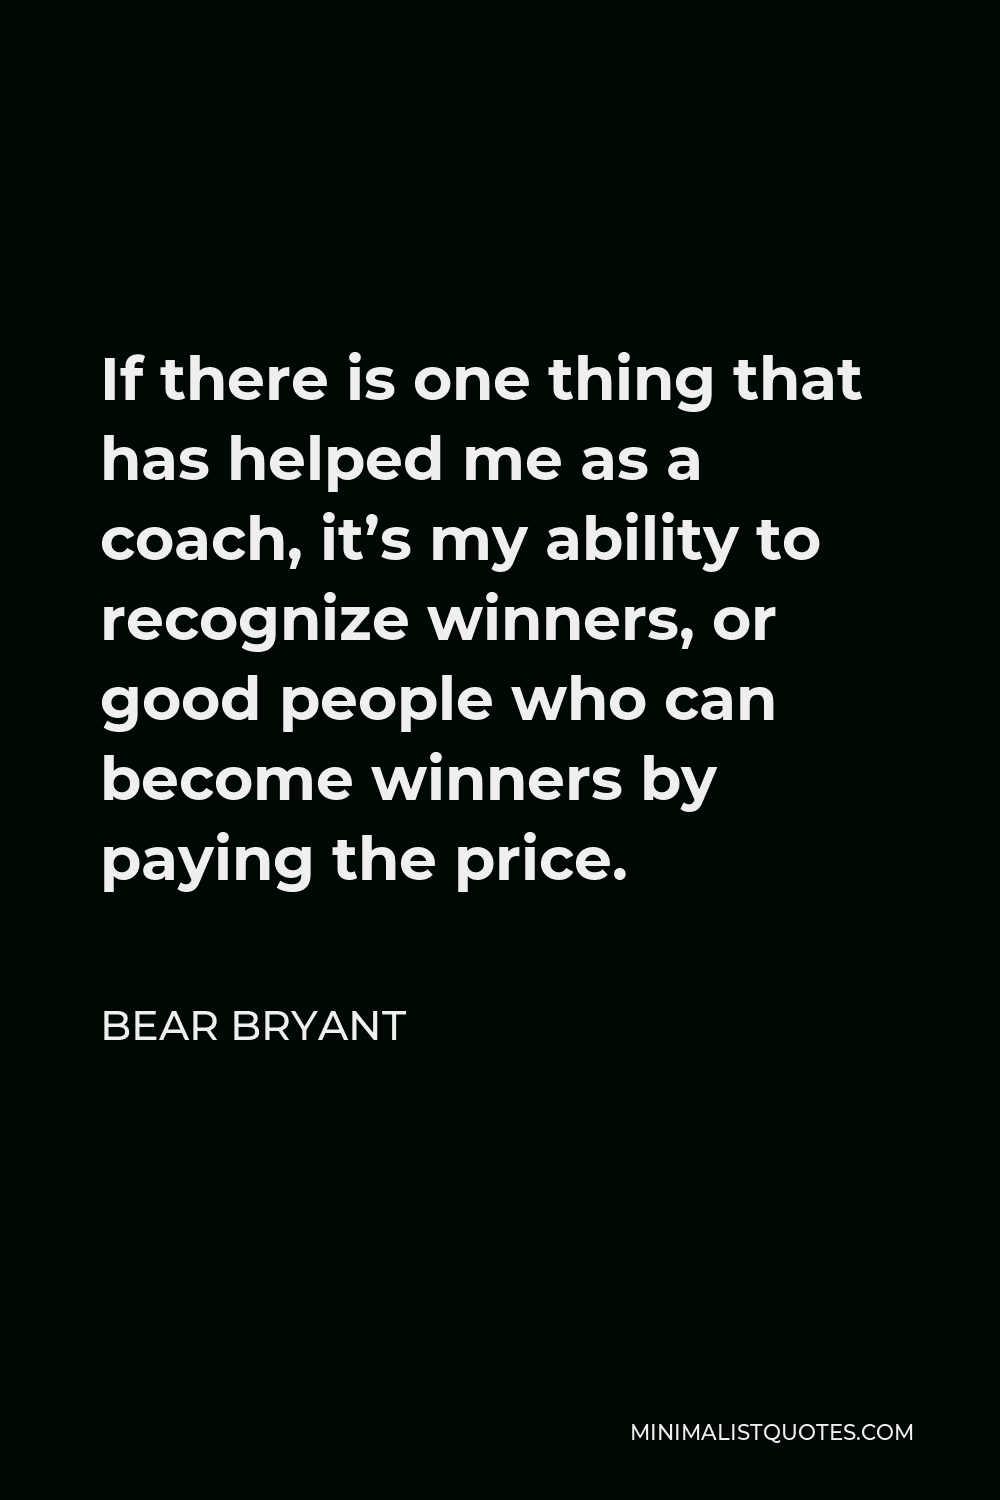 Bear Bryant Quote - If there is one thing that has helped me as a coach, it’s my ability to recognize winners, or good people who can become winners by paying the price.